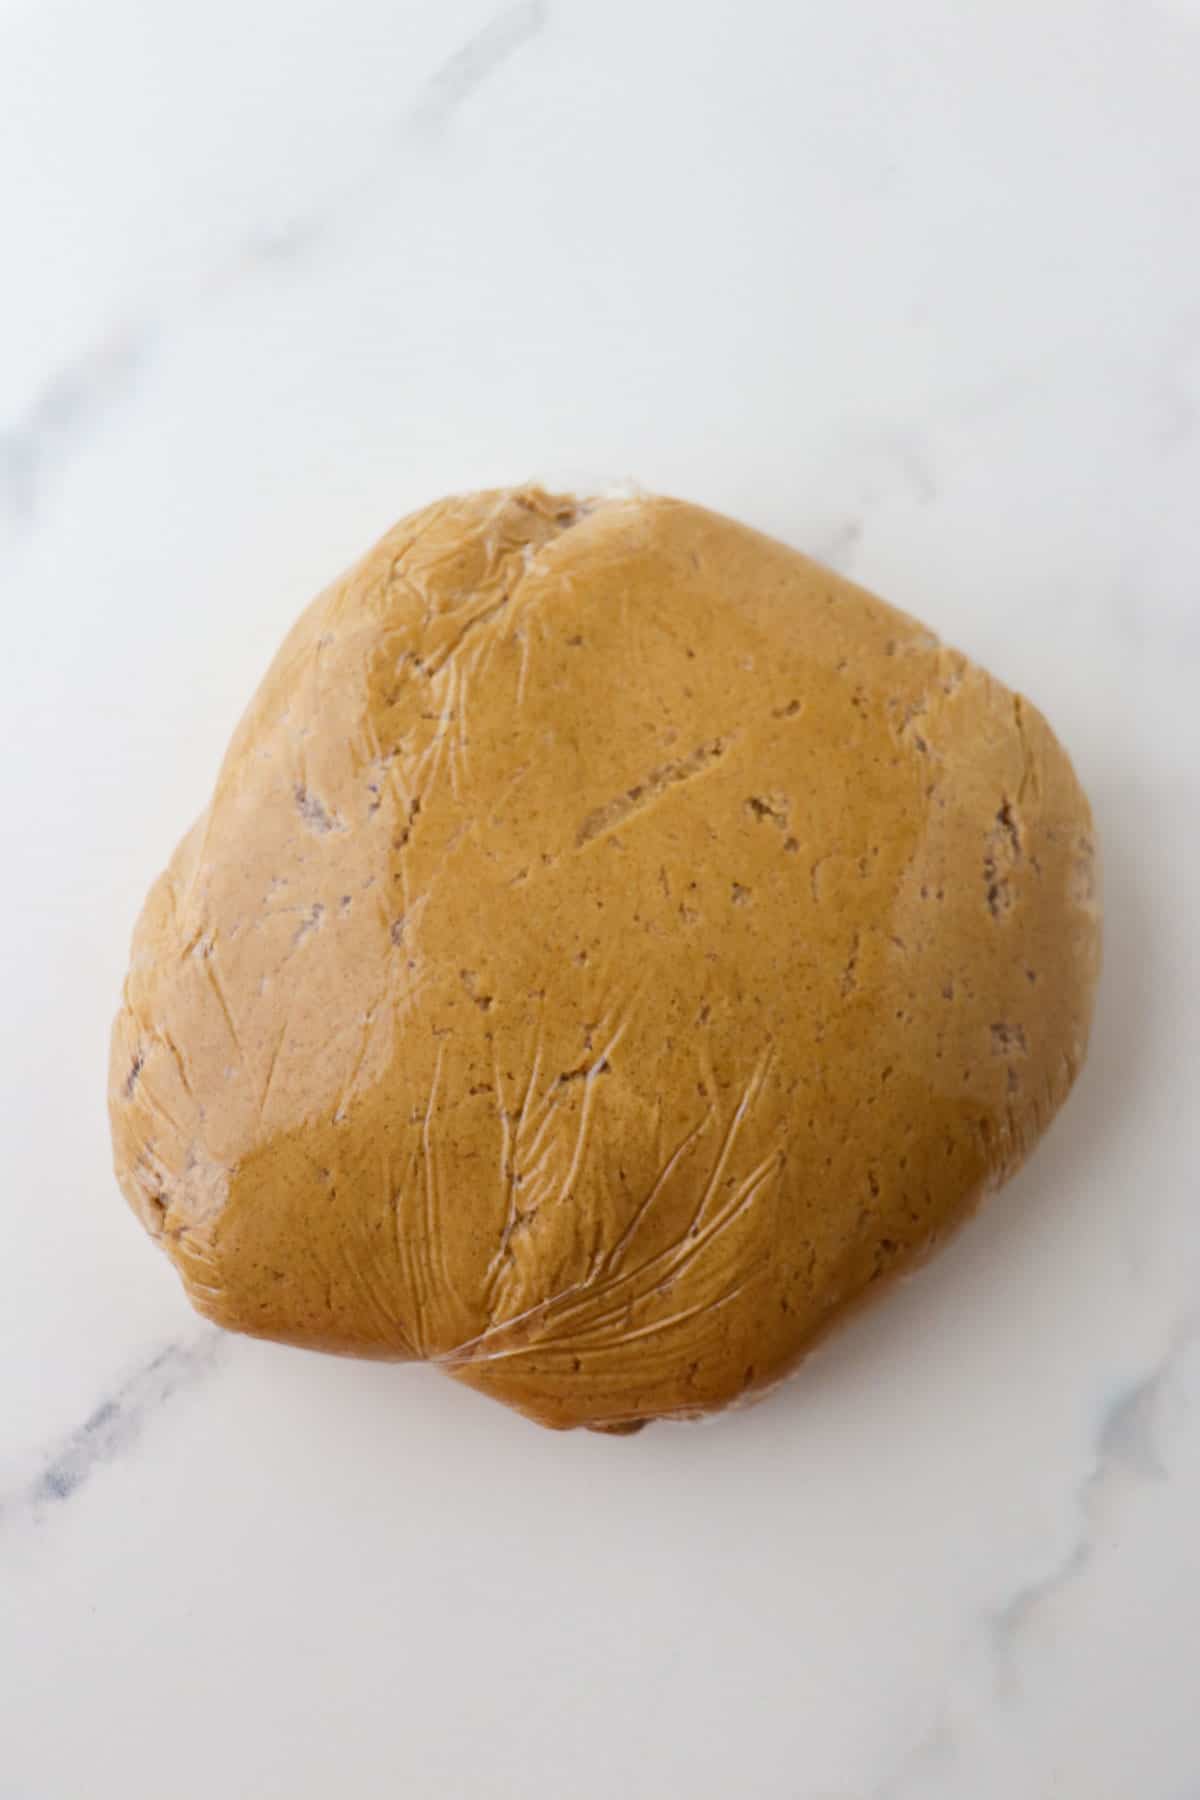 Swedish Ginger Cookie dough wrapped in saran wrap.